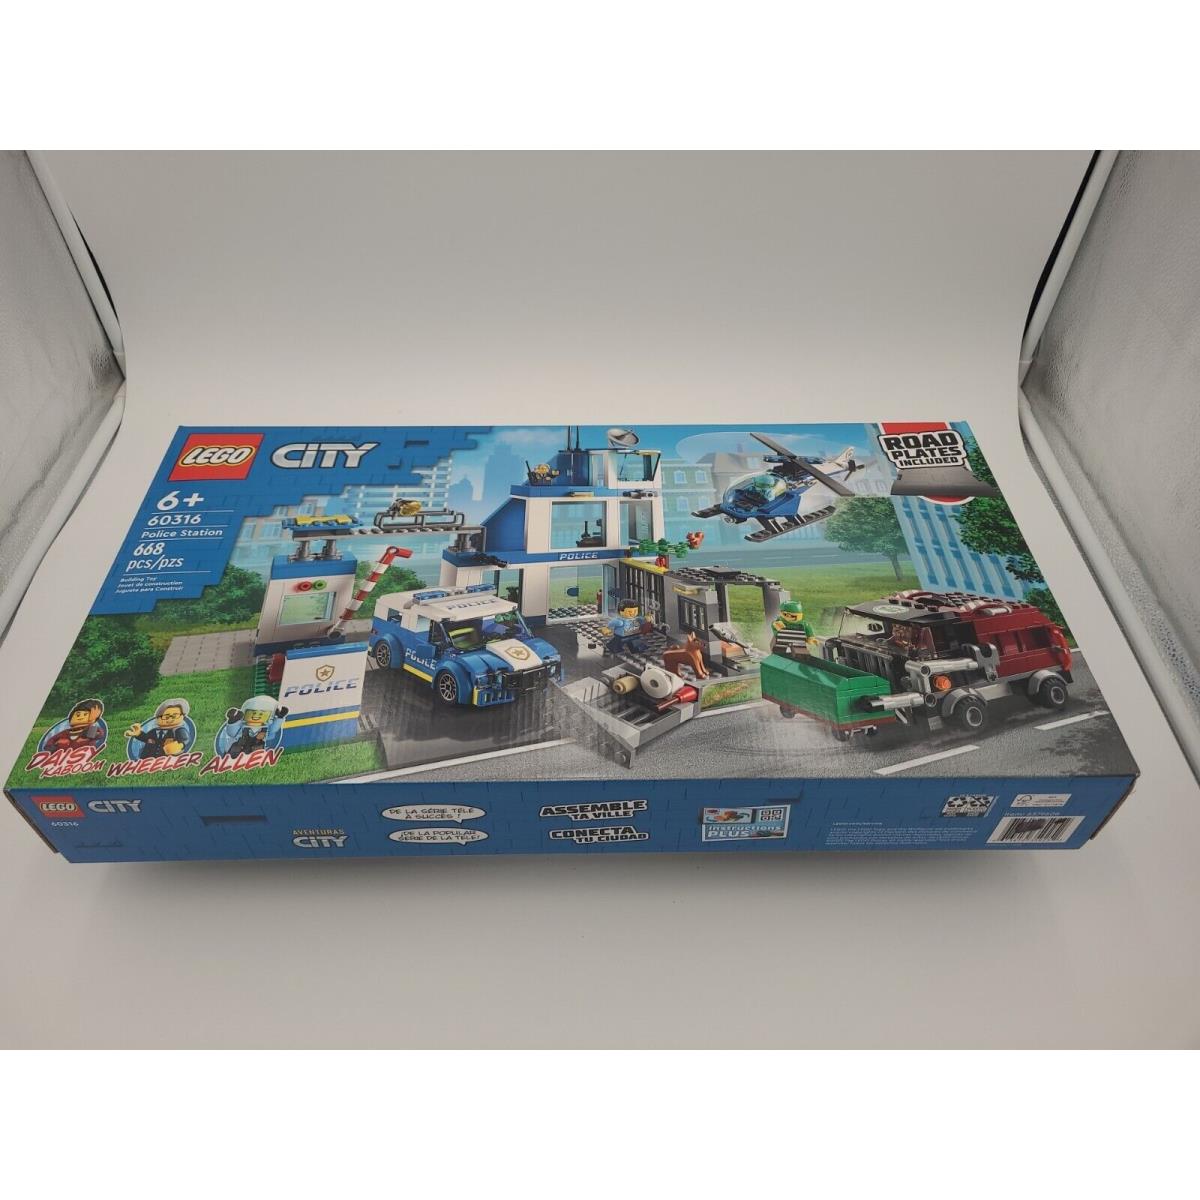 Lego City: Police Station 60316 Allen Wheeler Daisy Helicopter Outlaw Cops